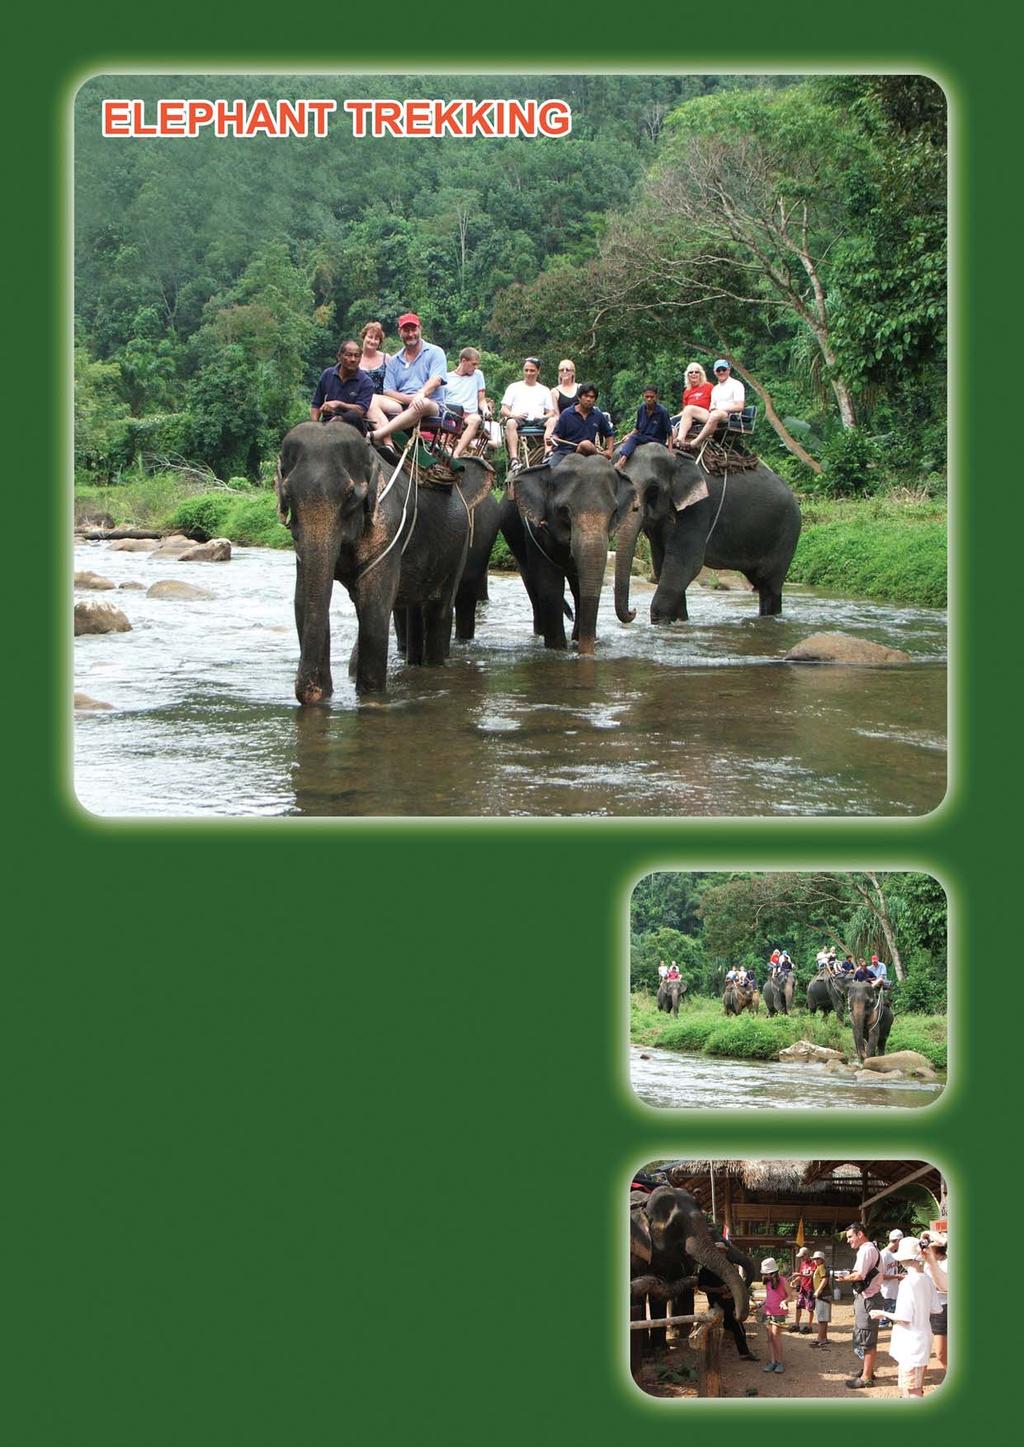 Elephant Trekking Tour Code (SLC 02) Being escorted on giant 4-leg wildlife through jungle gives you different experience from sitting on any vehicles.